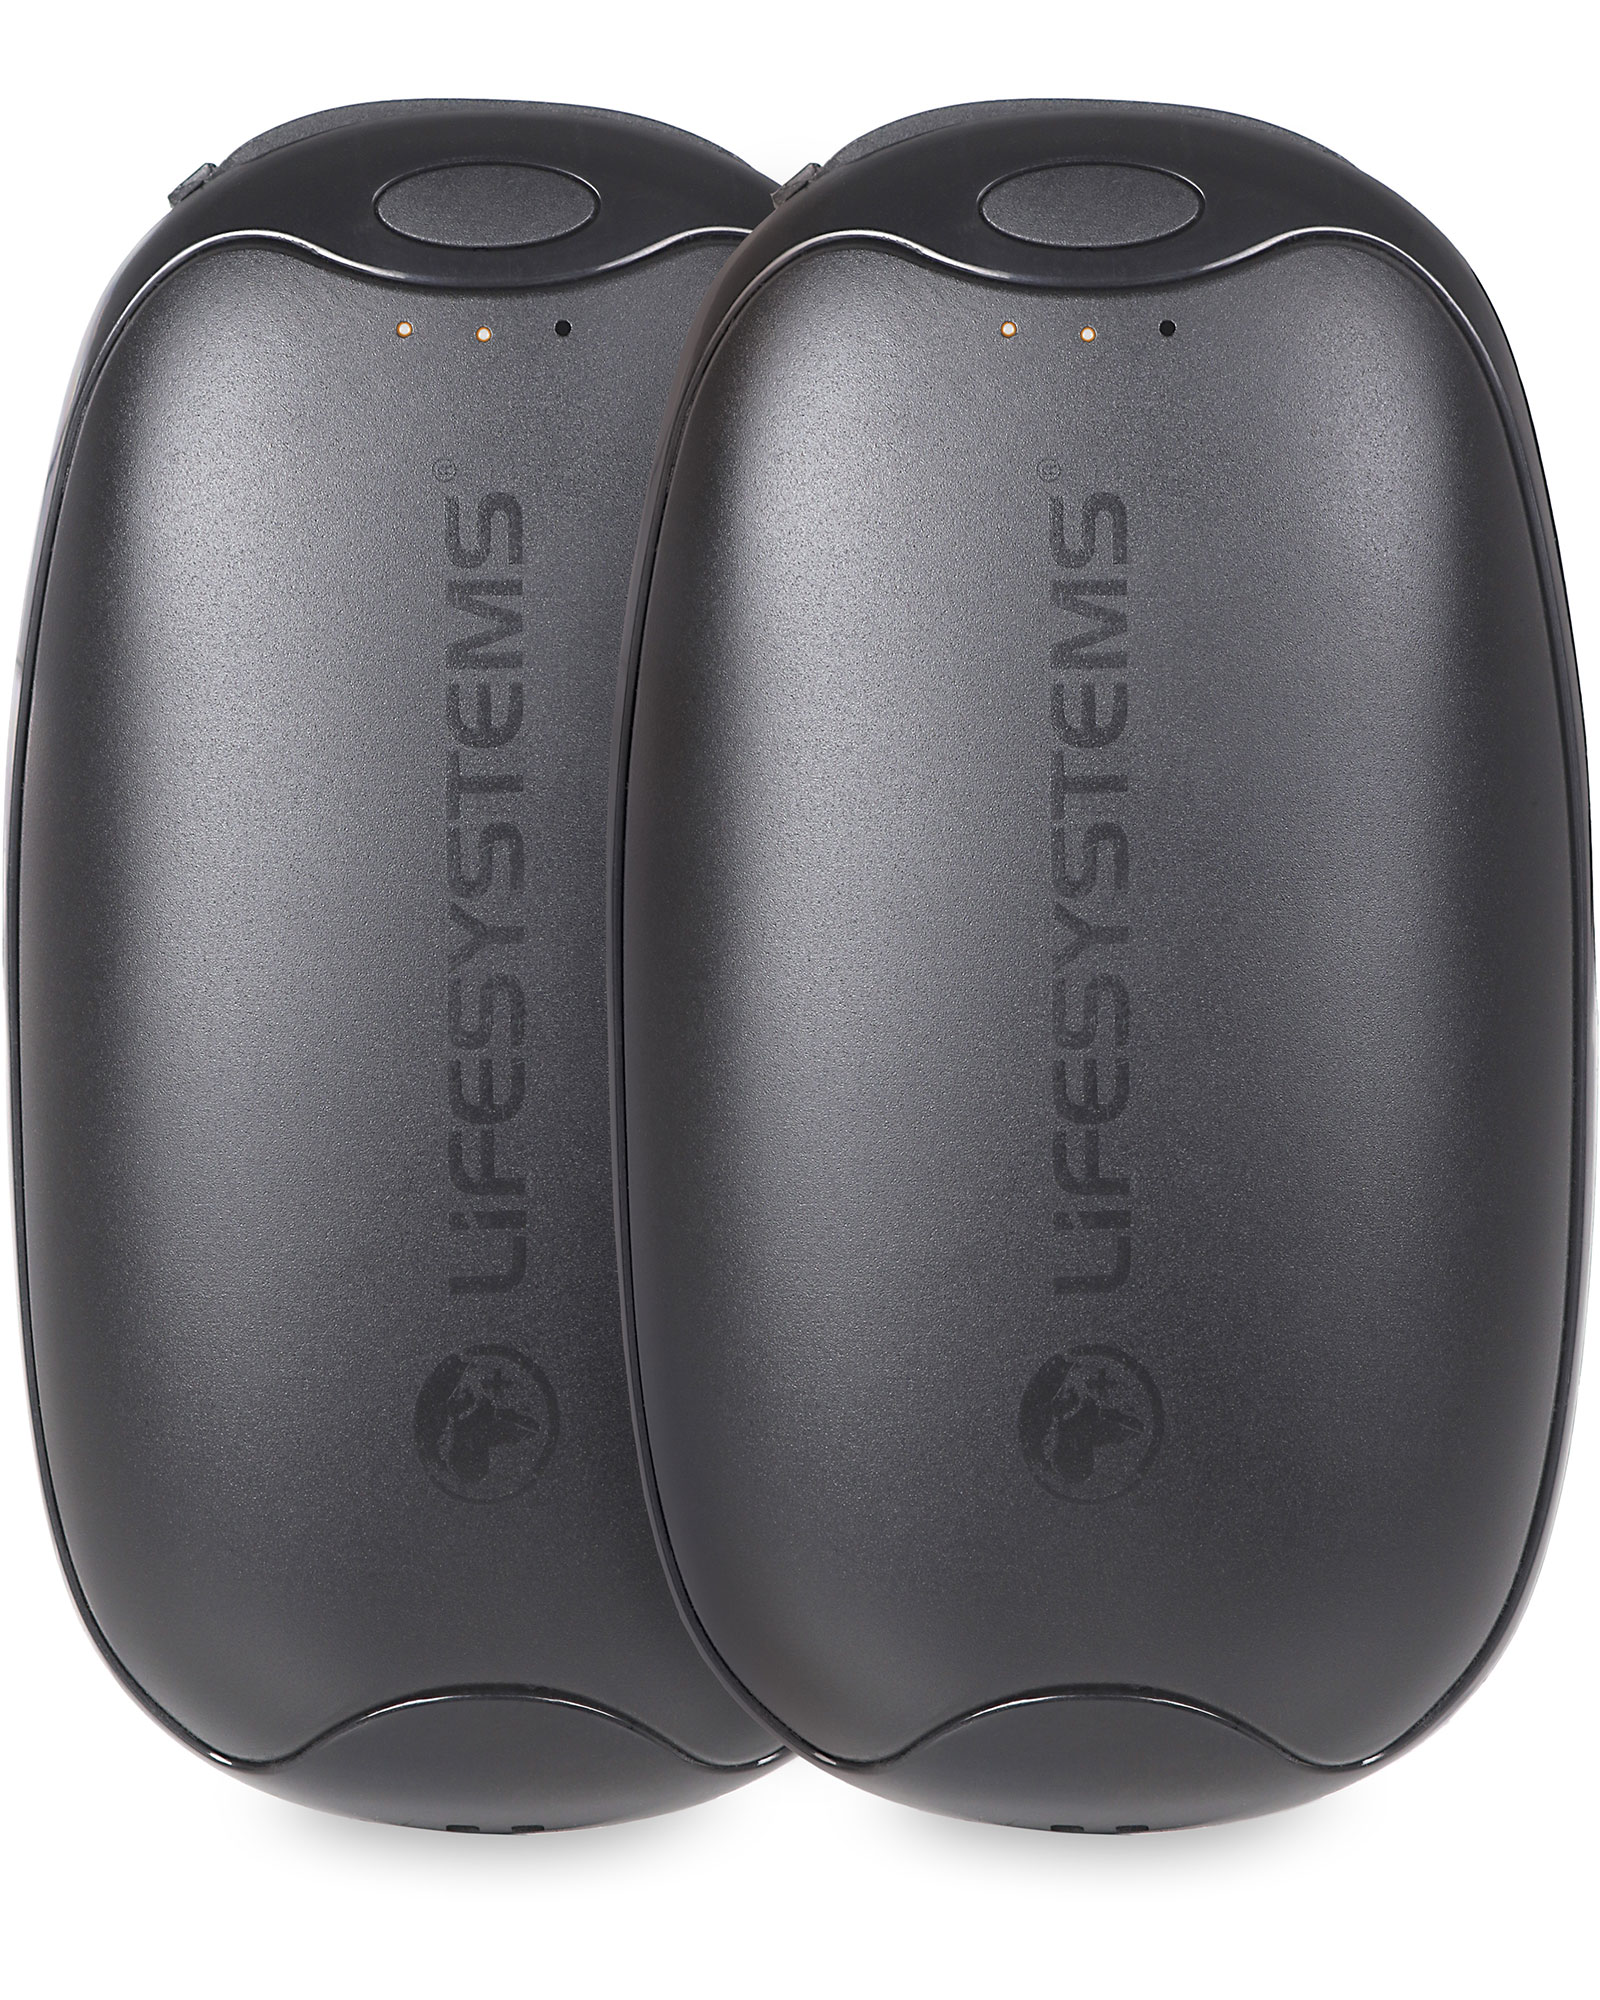 Lifesystems Rechargeable Dual-palm Handwarmers